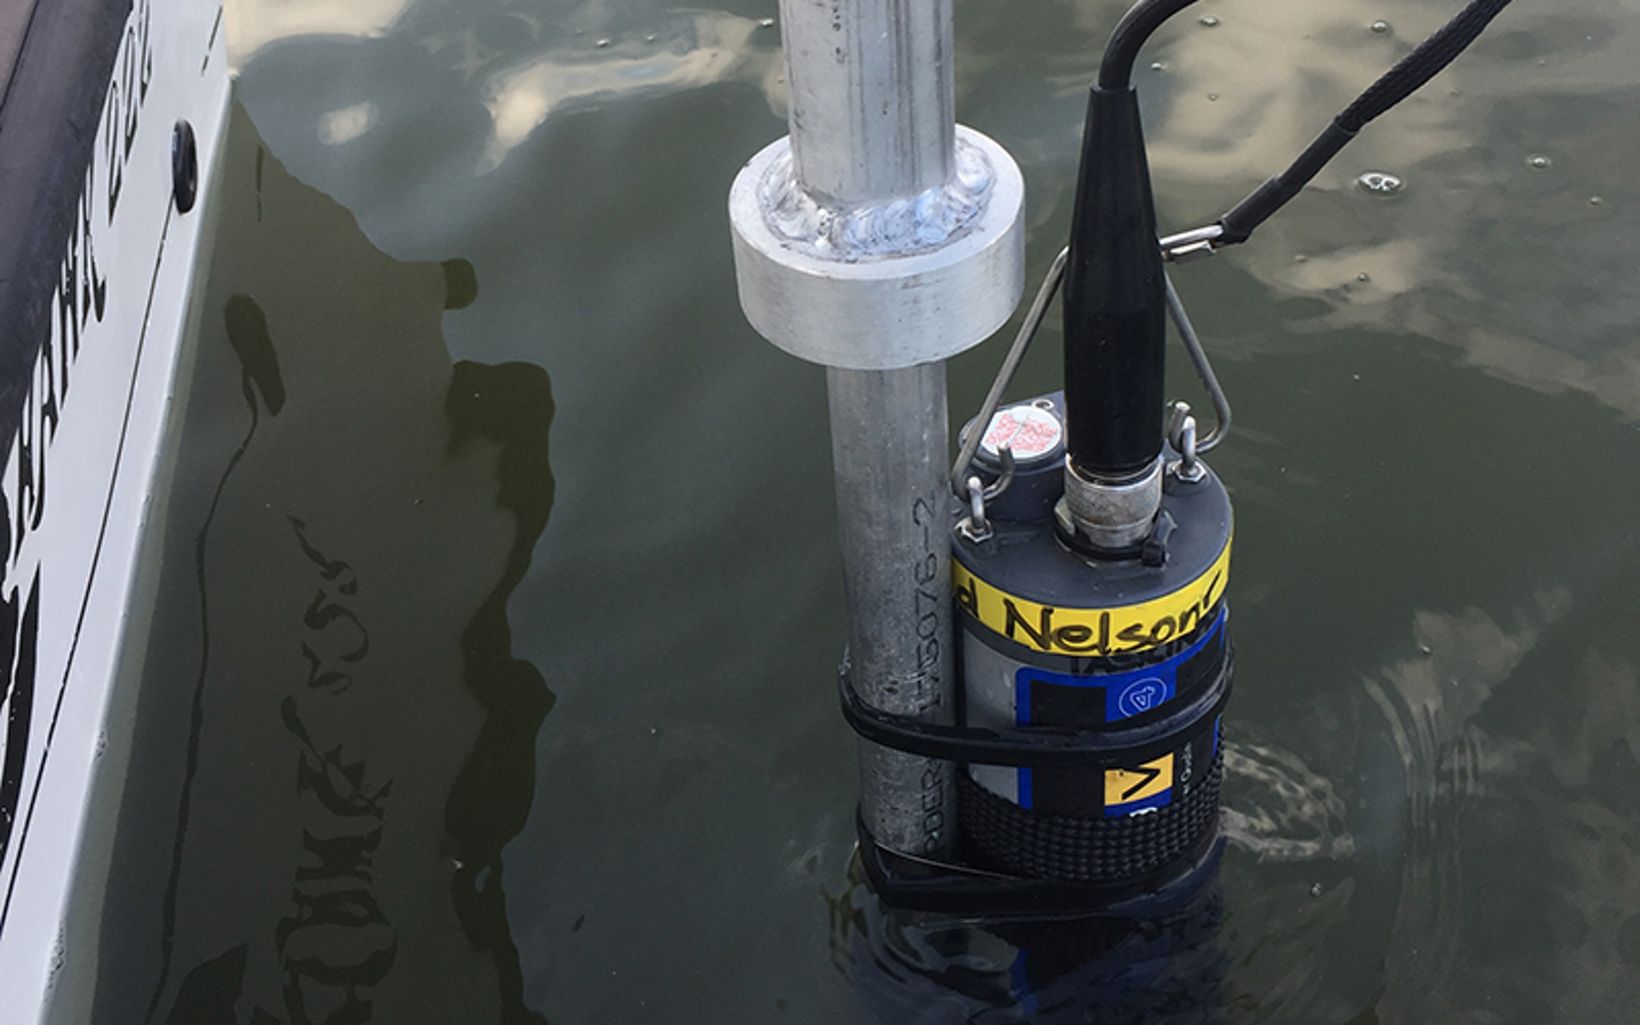 A water quality sensor samples the water every 10 seconds measuring dissolved oxygen, water temperature, salinity, and chlorophyll.
